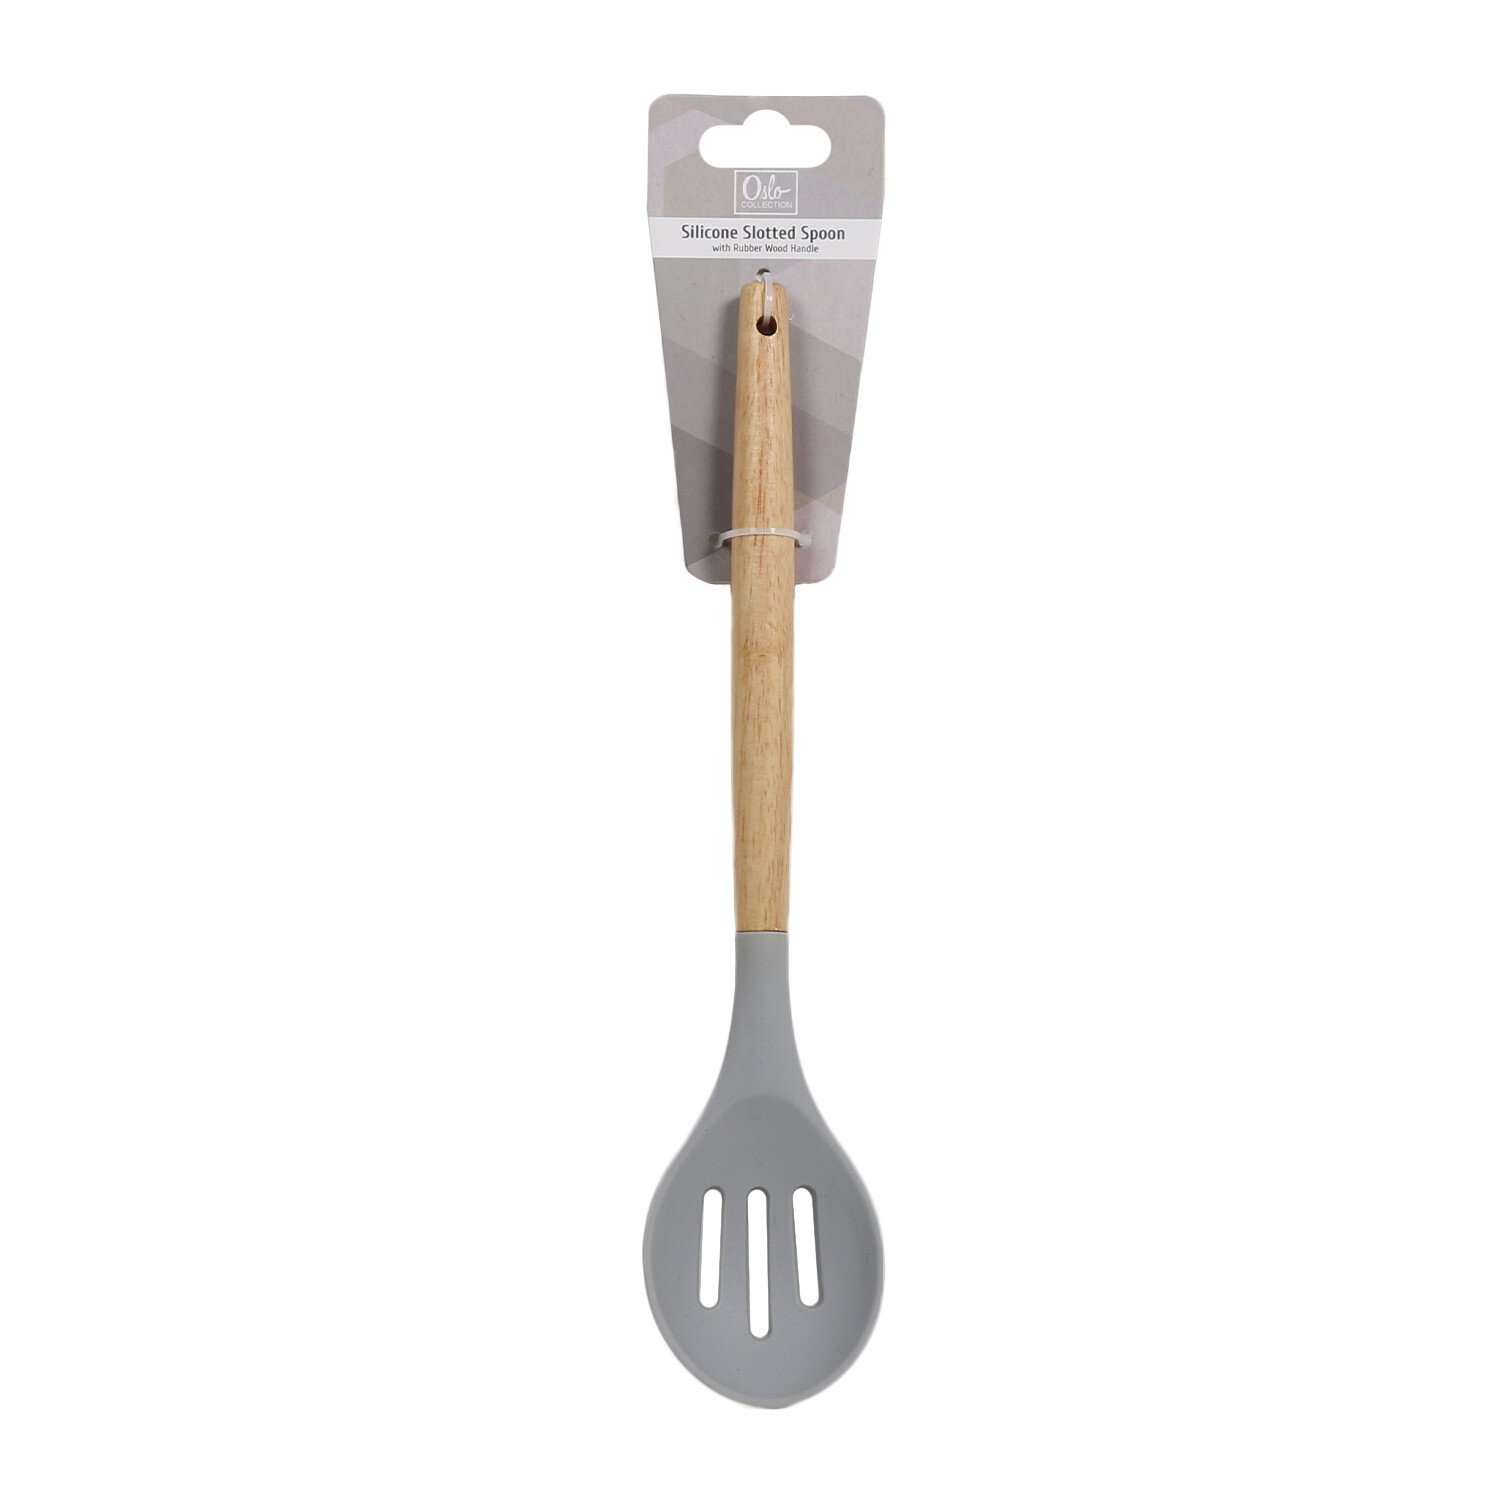 Oslo Silicone Slotted Spoon - Grey Image